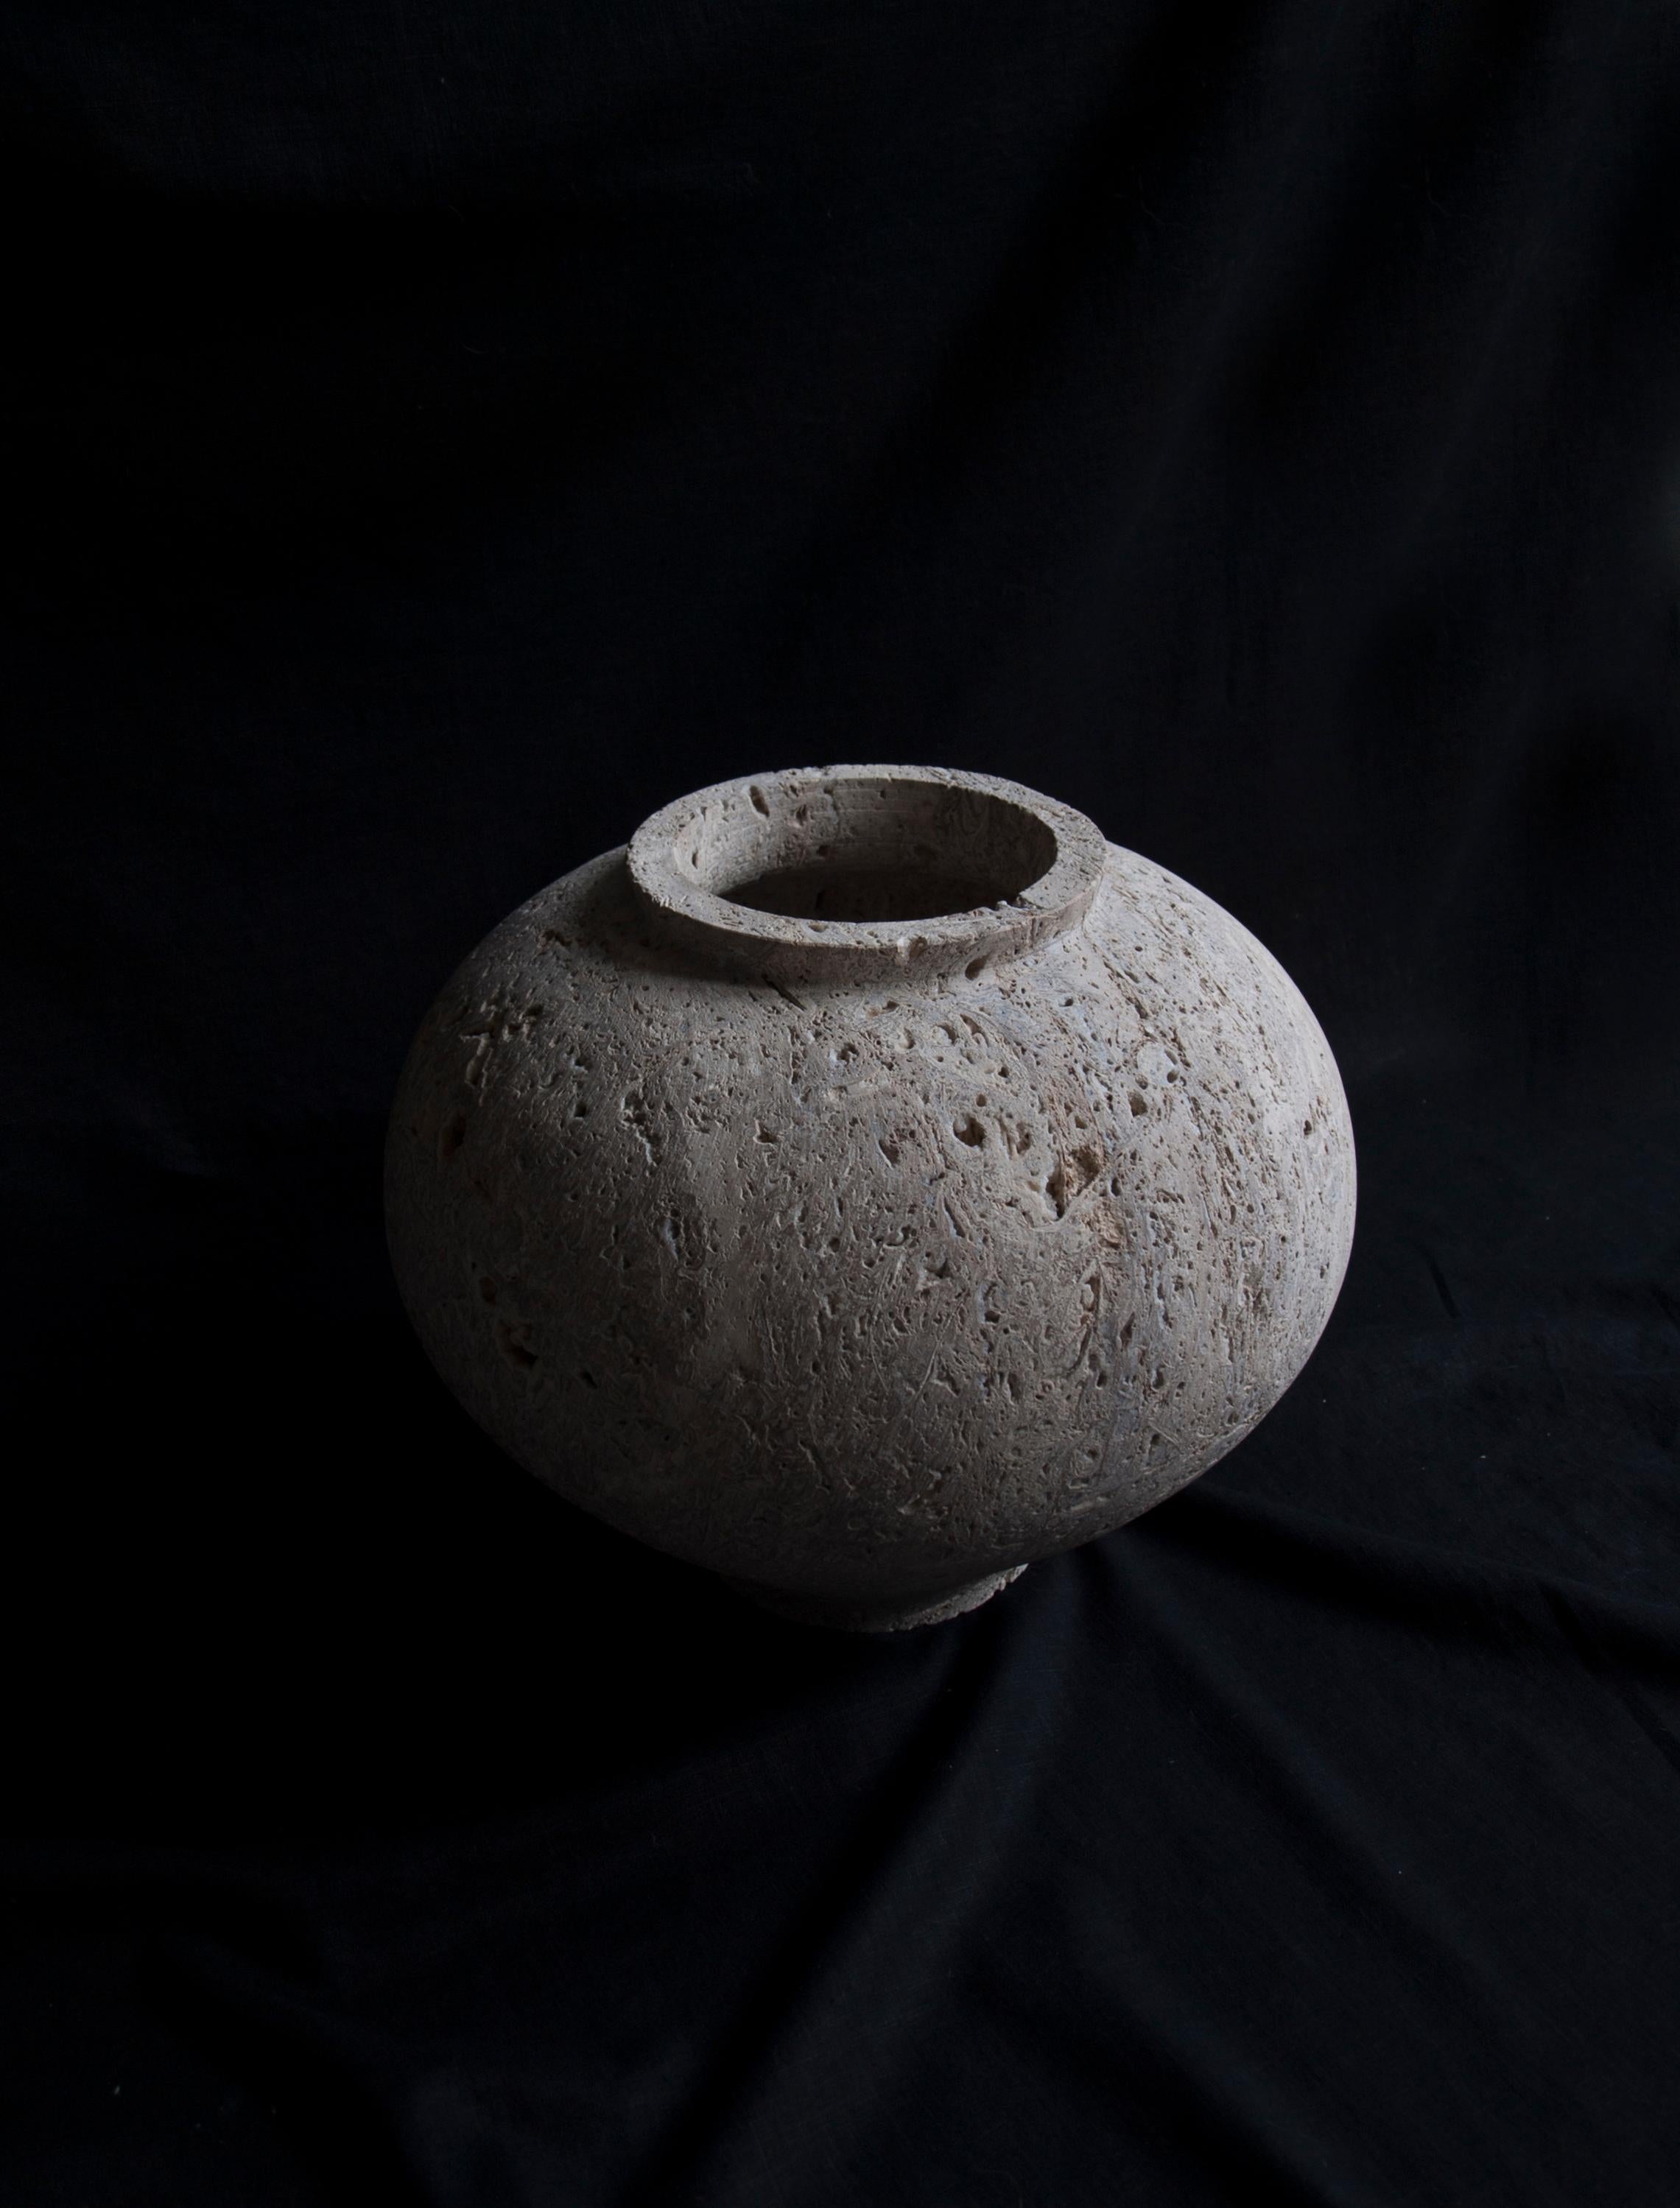 Moon jar by Bicci de' Medici Studio
Dimensions: Diameter 37cm x H 30cm
Materials: Natural stone.
Technique: Hand-crafted. Freeform. Unfinished look. 


Bicci de’ Medici manufactures exclusive design pieces, formed by hand, conceived by